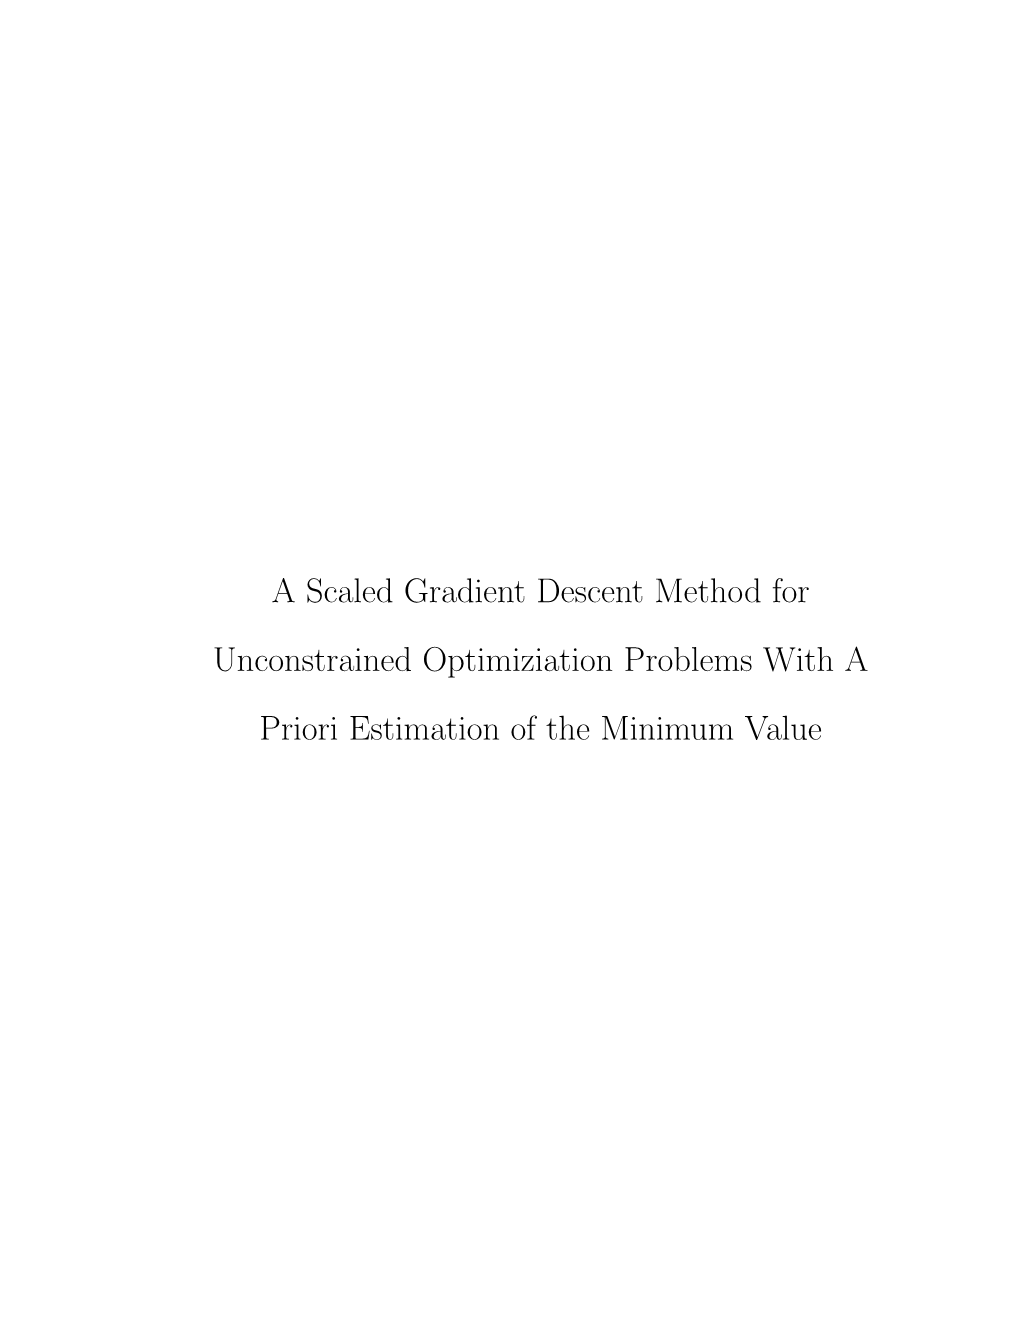 A Scaled Gradient Descent Method for Unconstrained Optimiziation Problems with a Priori Estimation of the Minimum Value a SCALED GRADIENT DESCENT METHOD FOR